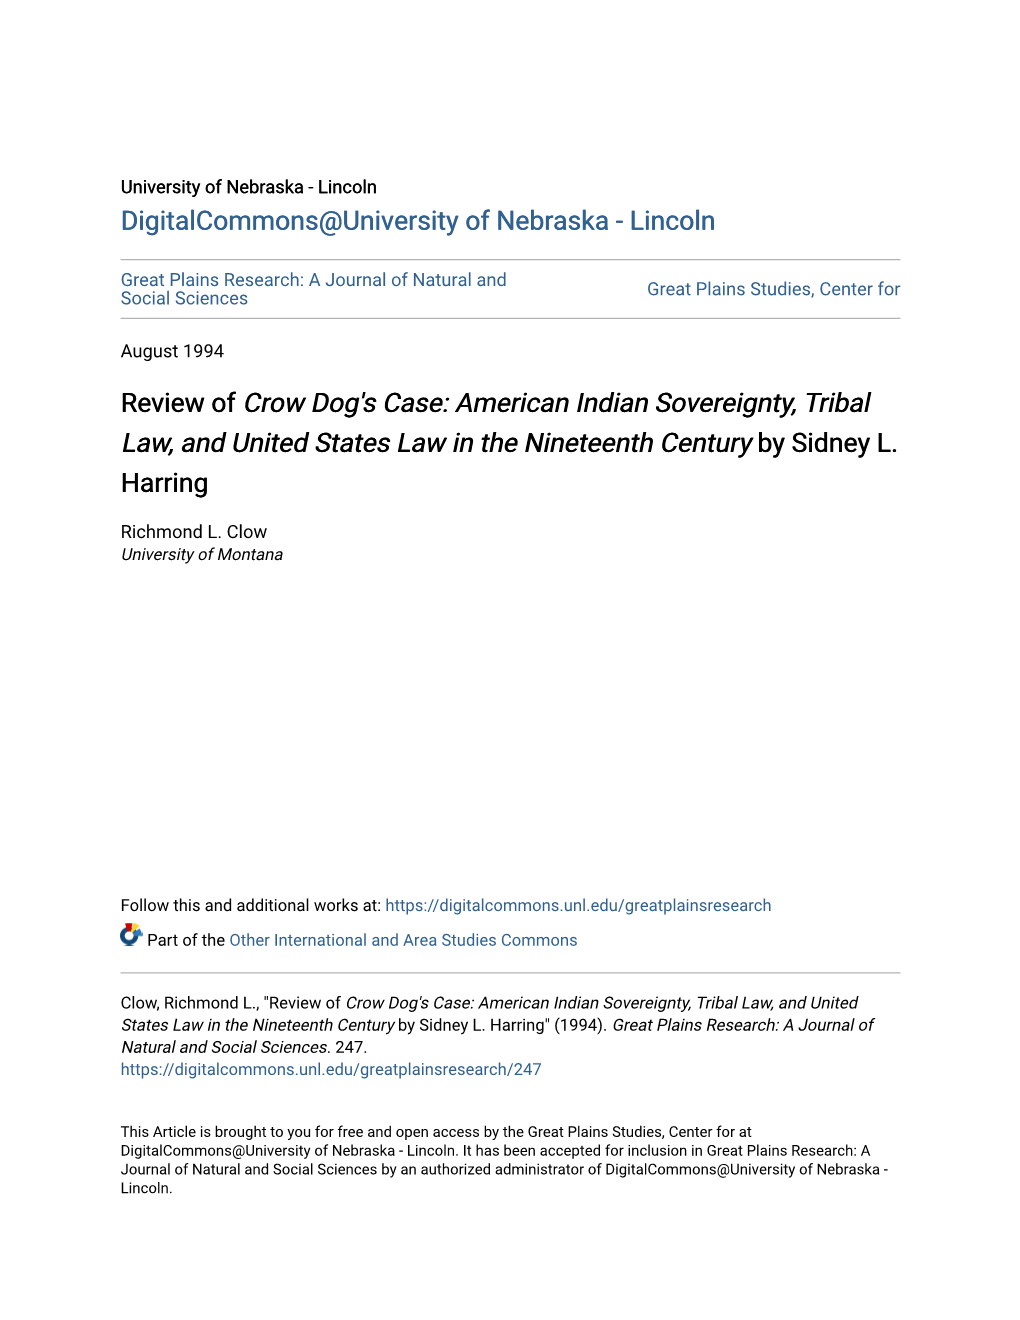 Review of Crow Dog's Case: American Indian Sovereignty, Tribal Law, and United States Law in the Nineteenth Century by Sidney L